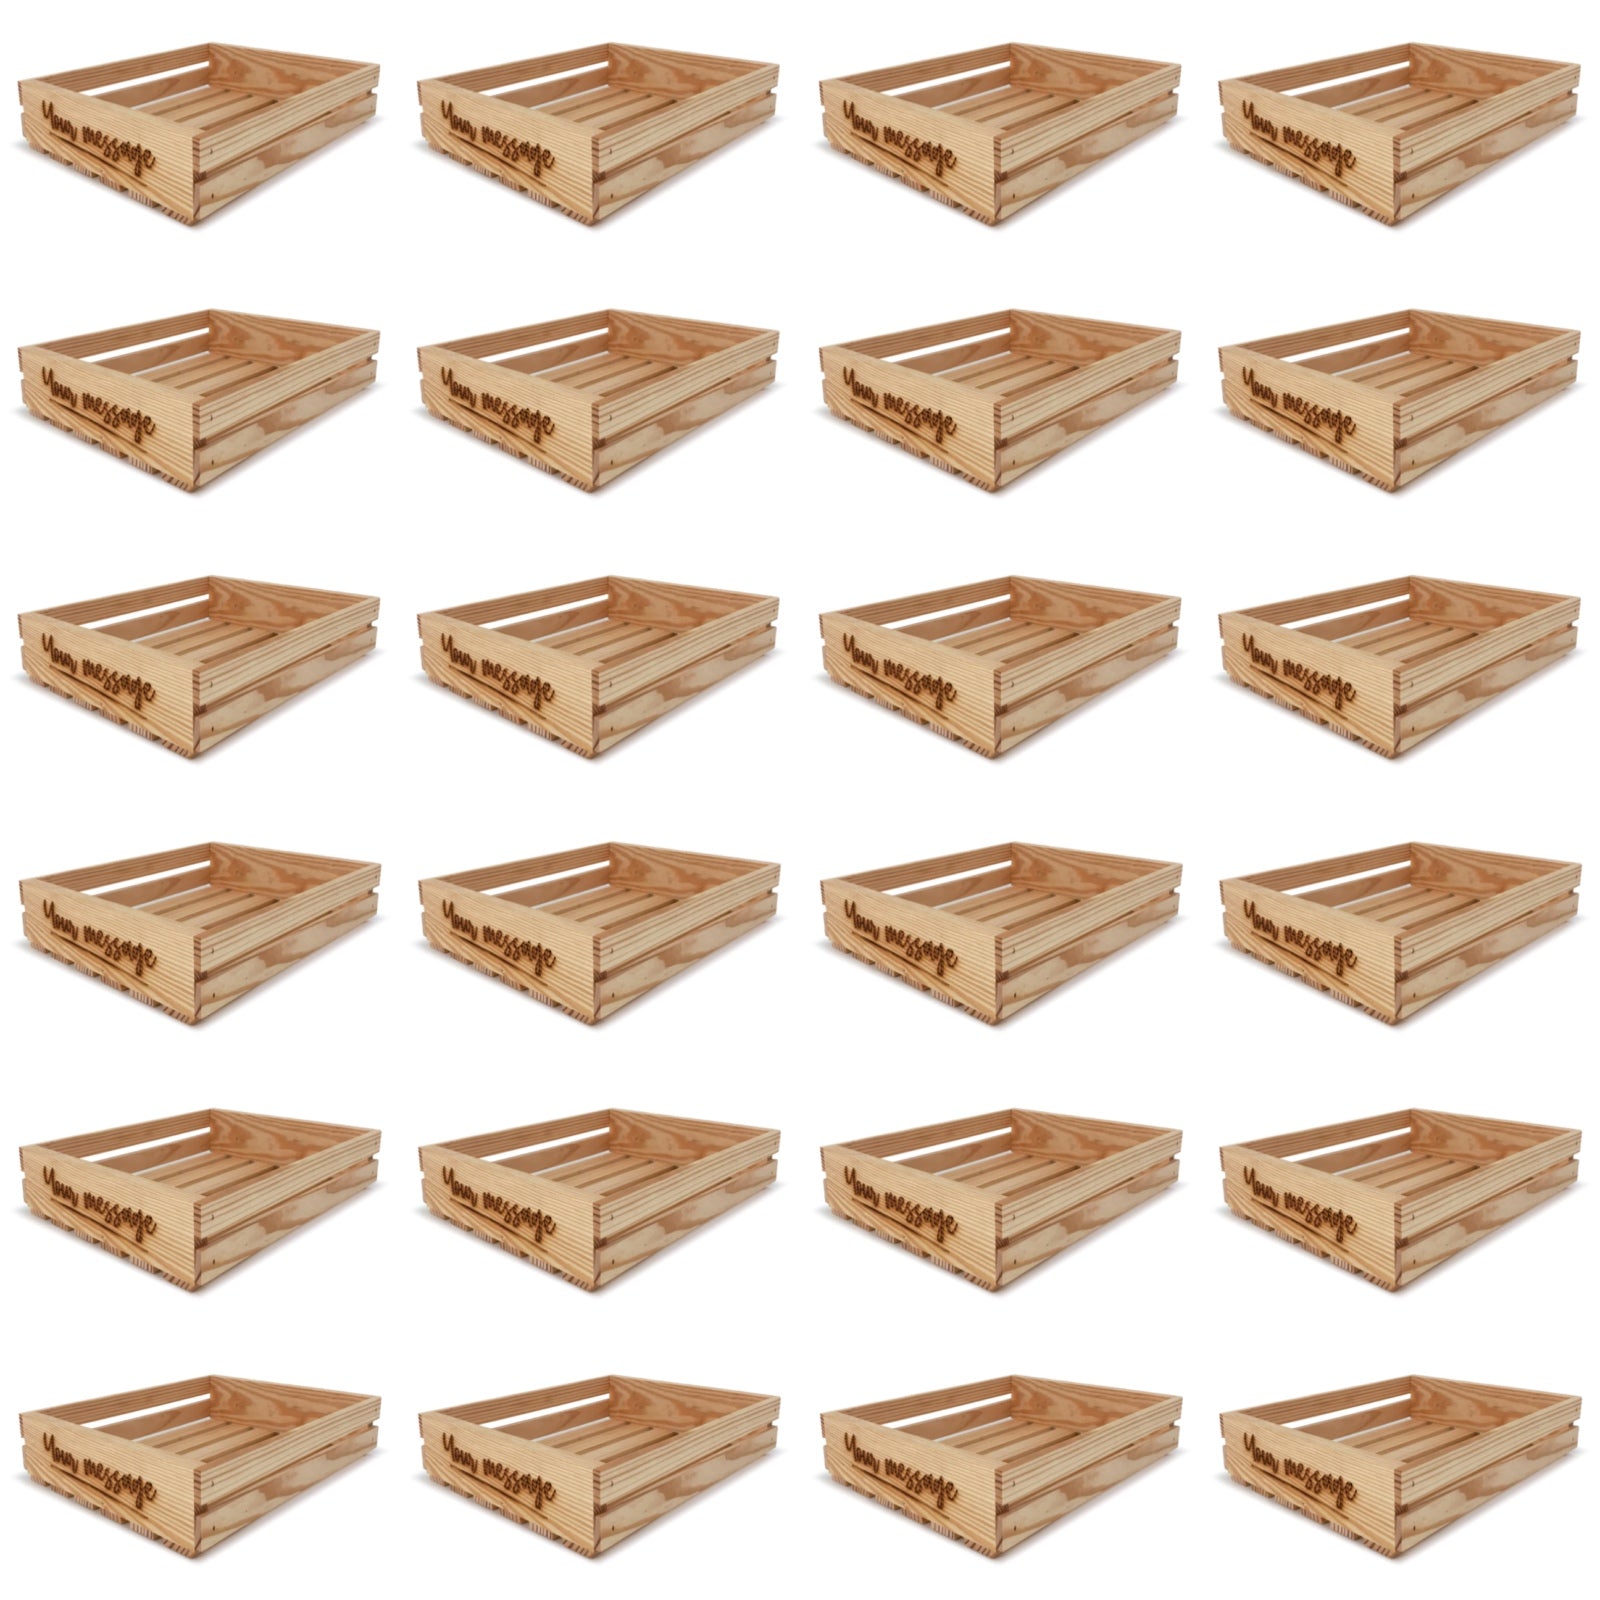 24 Customizable small wooden crates 14x12x3.5